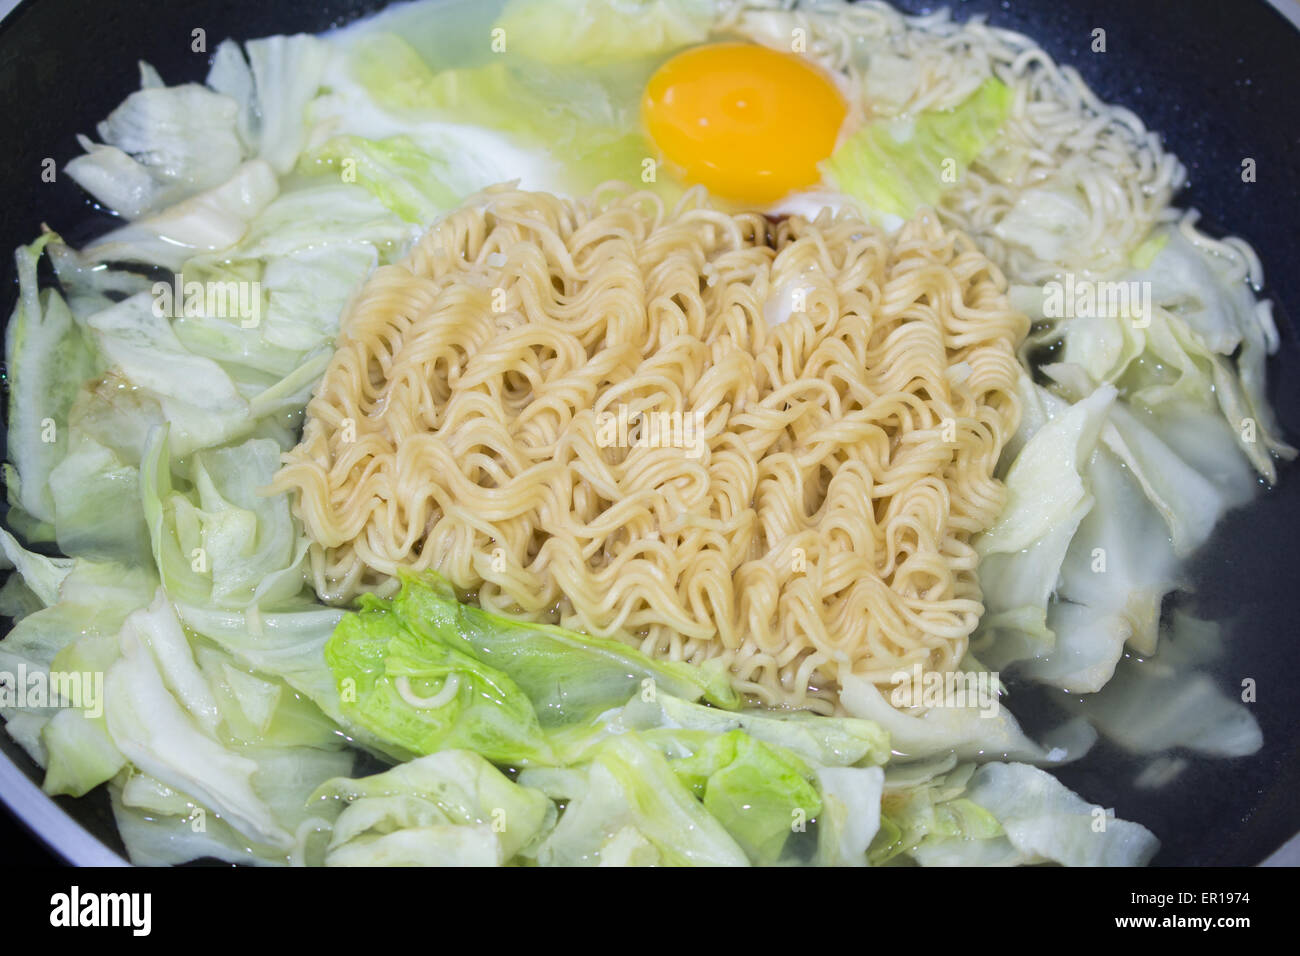 Cooking noodle and vegetable close up of boiling noodles in a pot Stock Photo